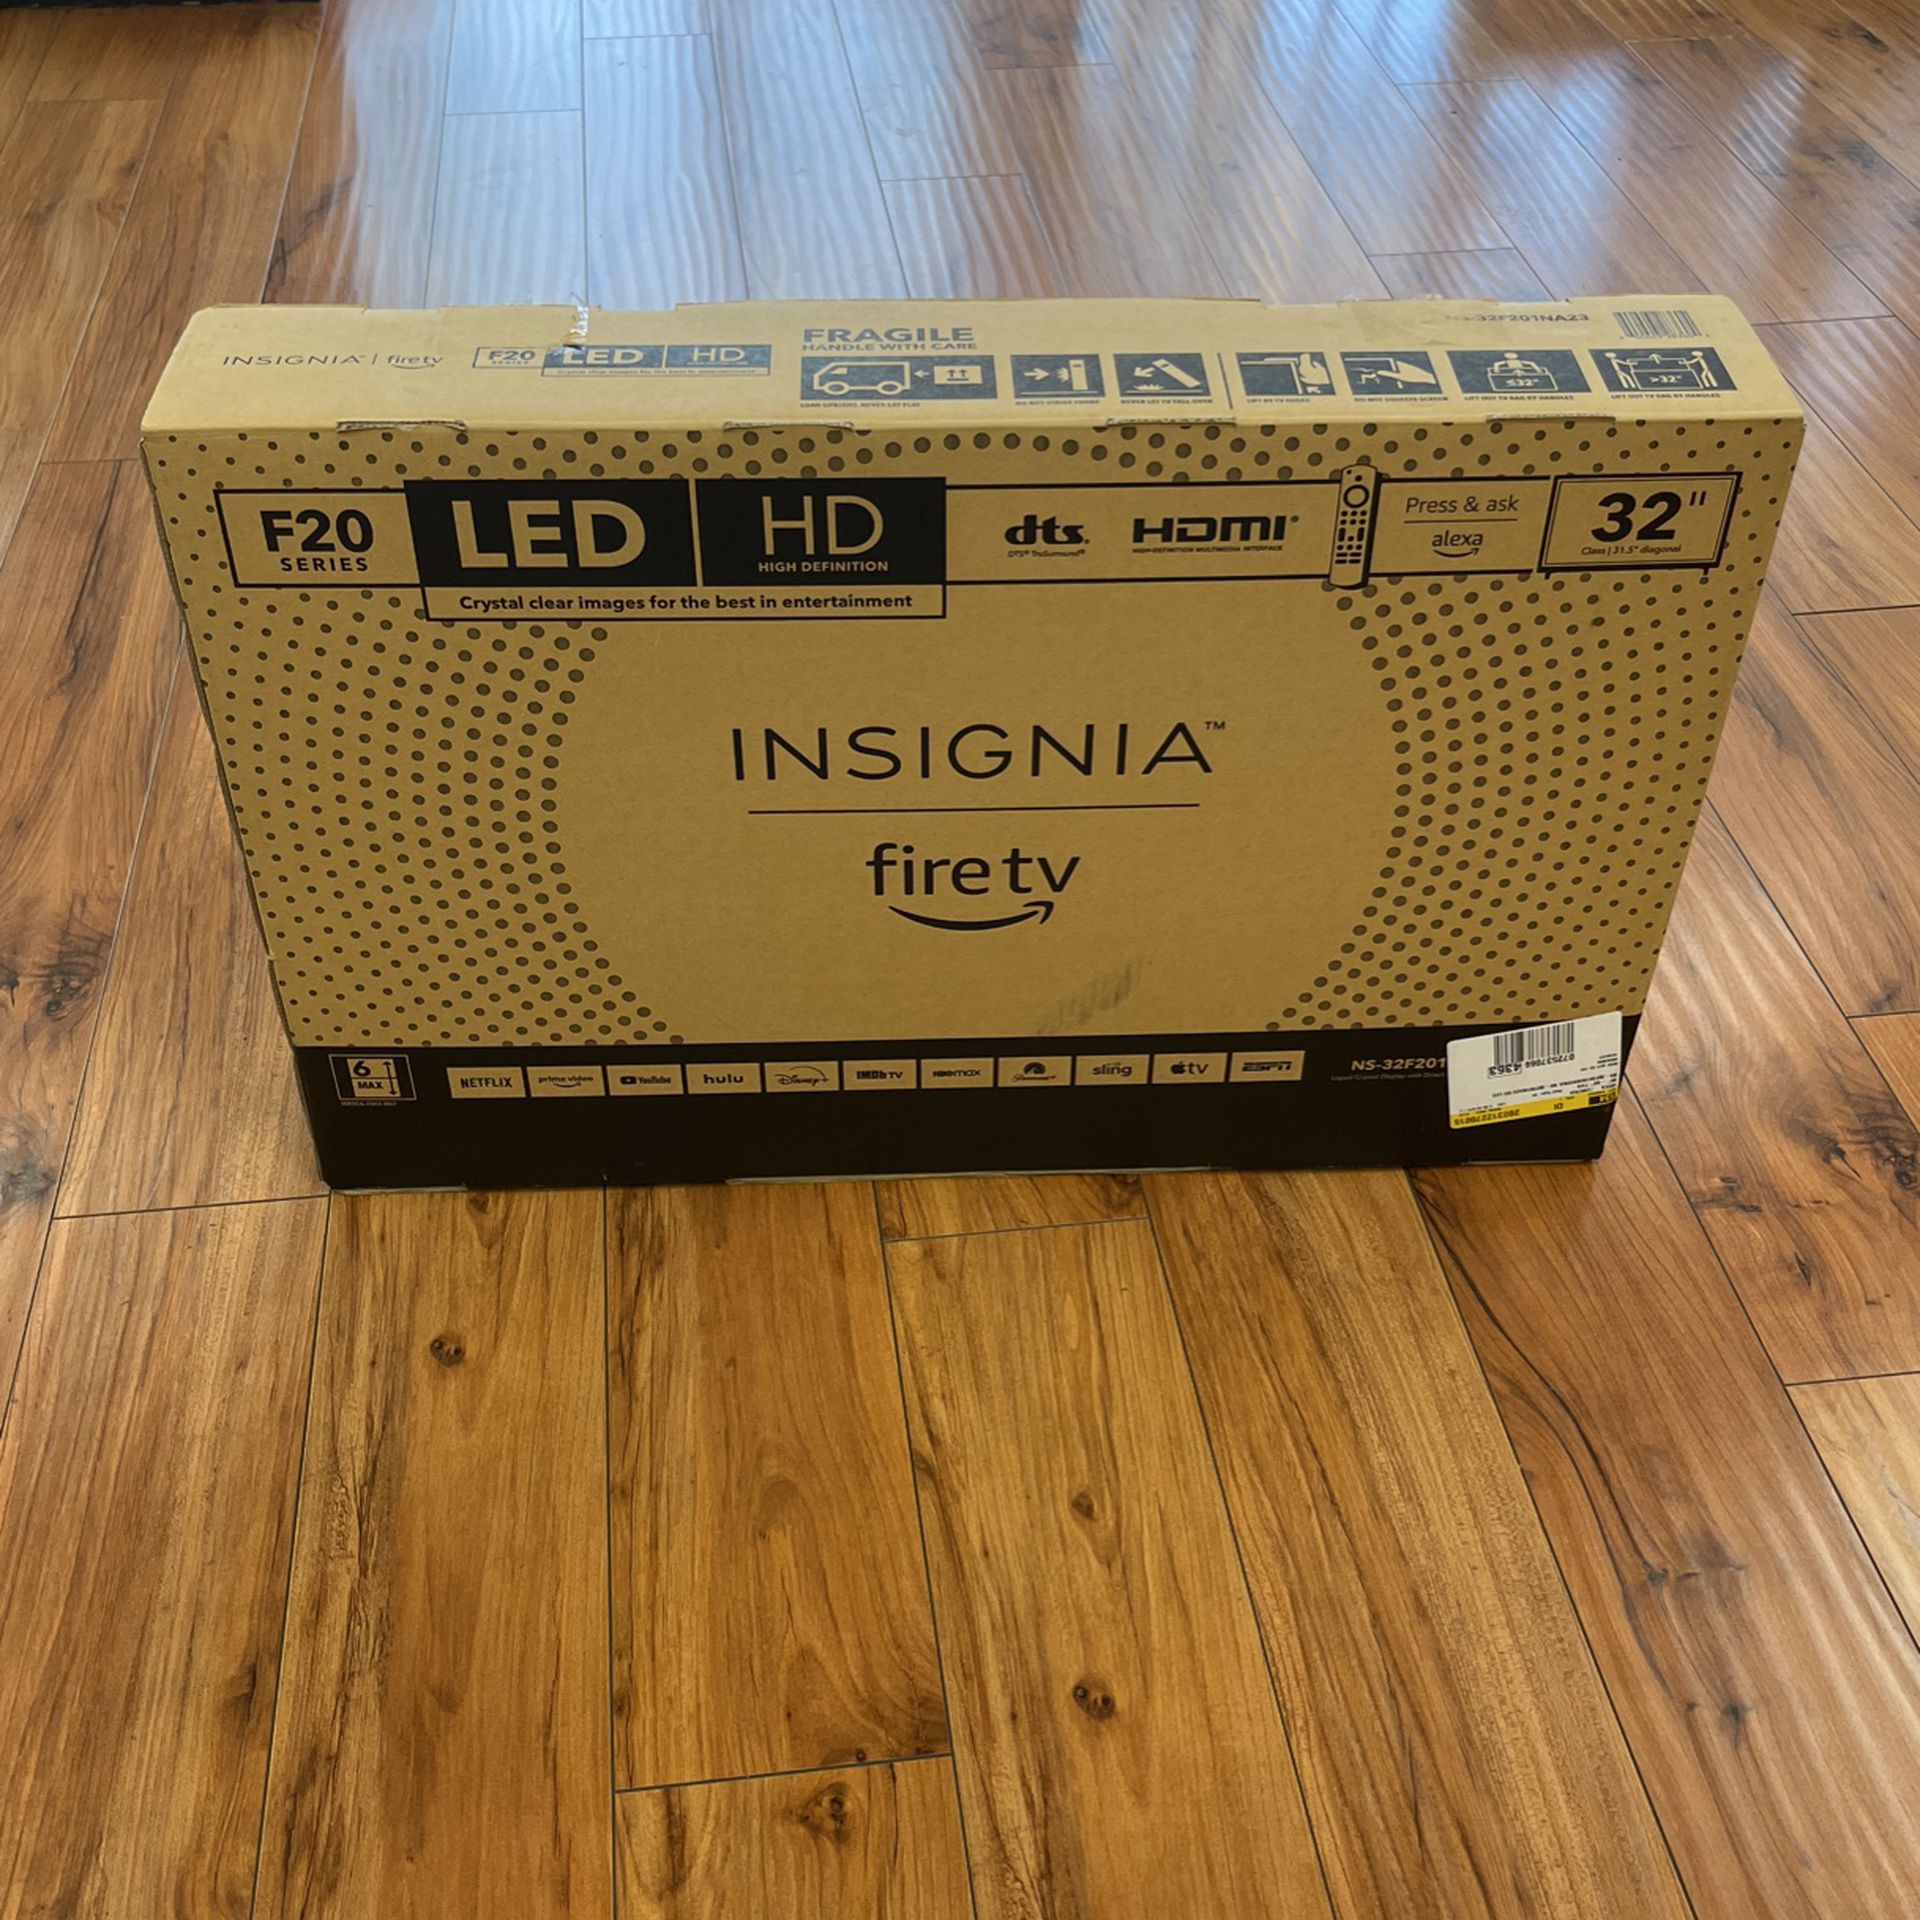 New Condition, Insignia 32” TV, With Box, Opened Only To Verify Contents